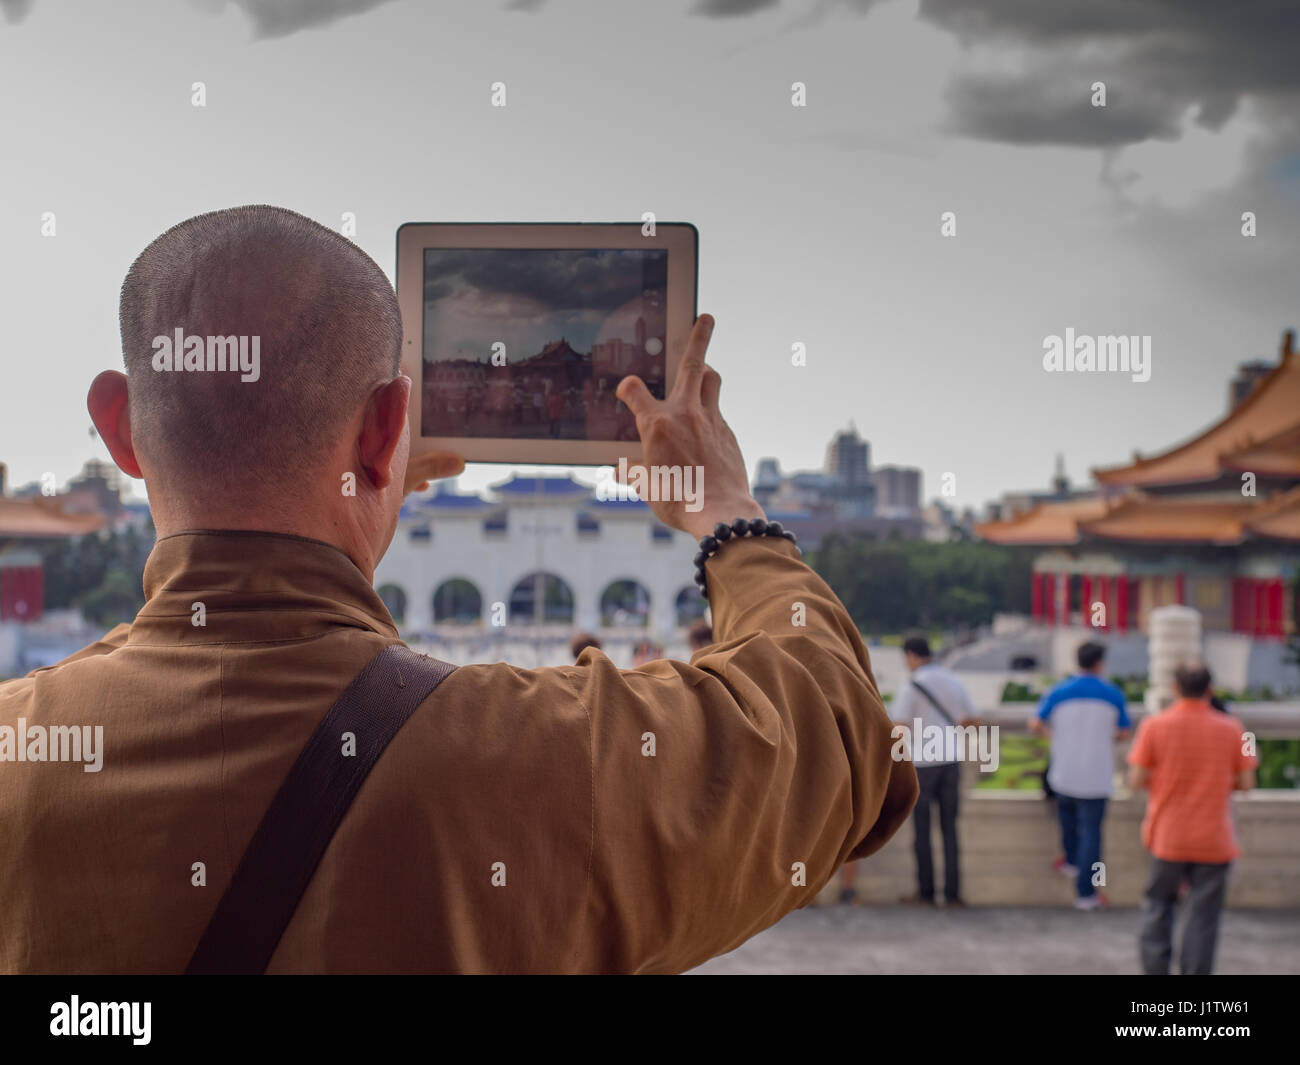 Taipei, Taiwan - October 02, 2016: Buddhist monk takes a picture with his iPad on the  Liberty Square in Taipei Stock Photo